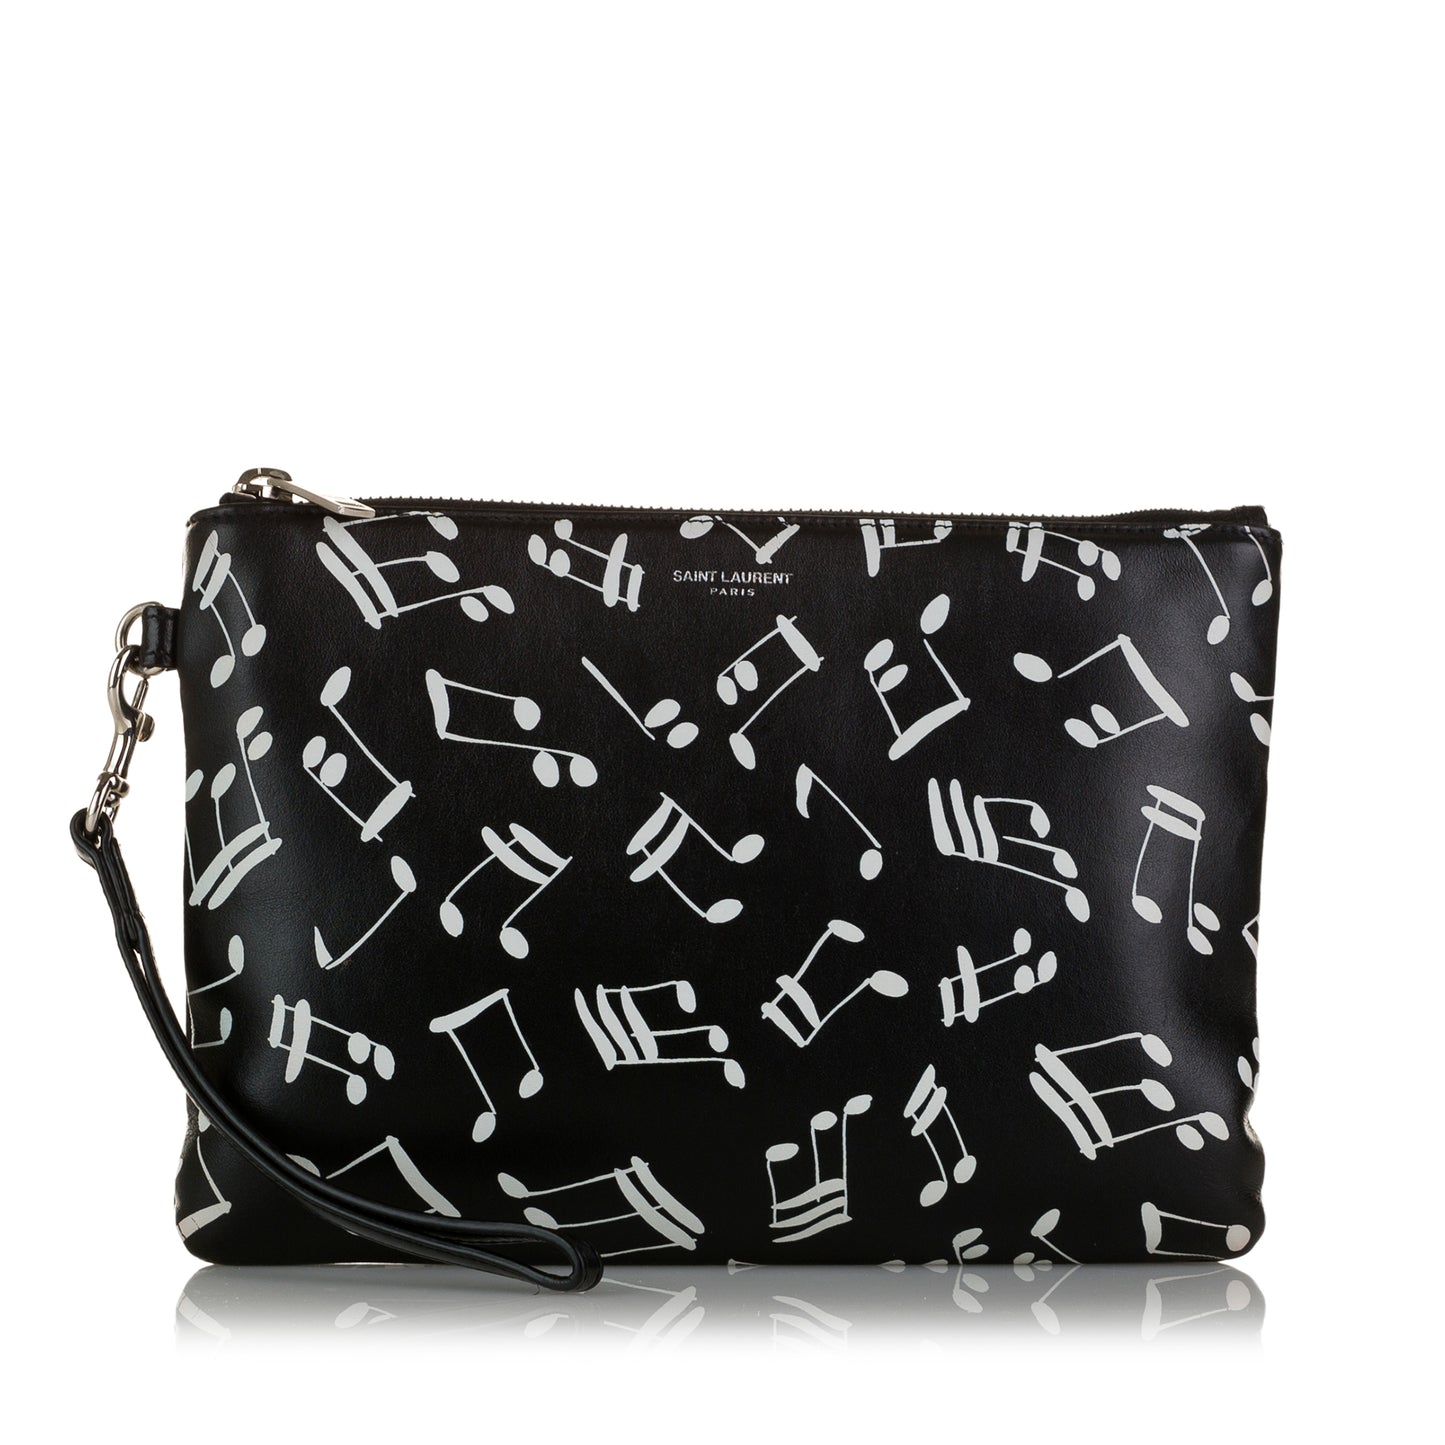 Musical Notes Print Leather Clutch